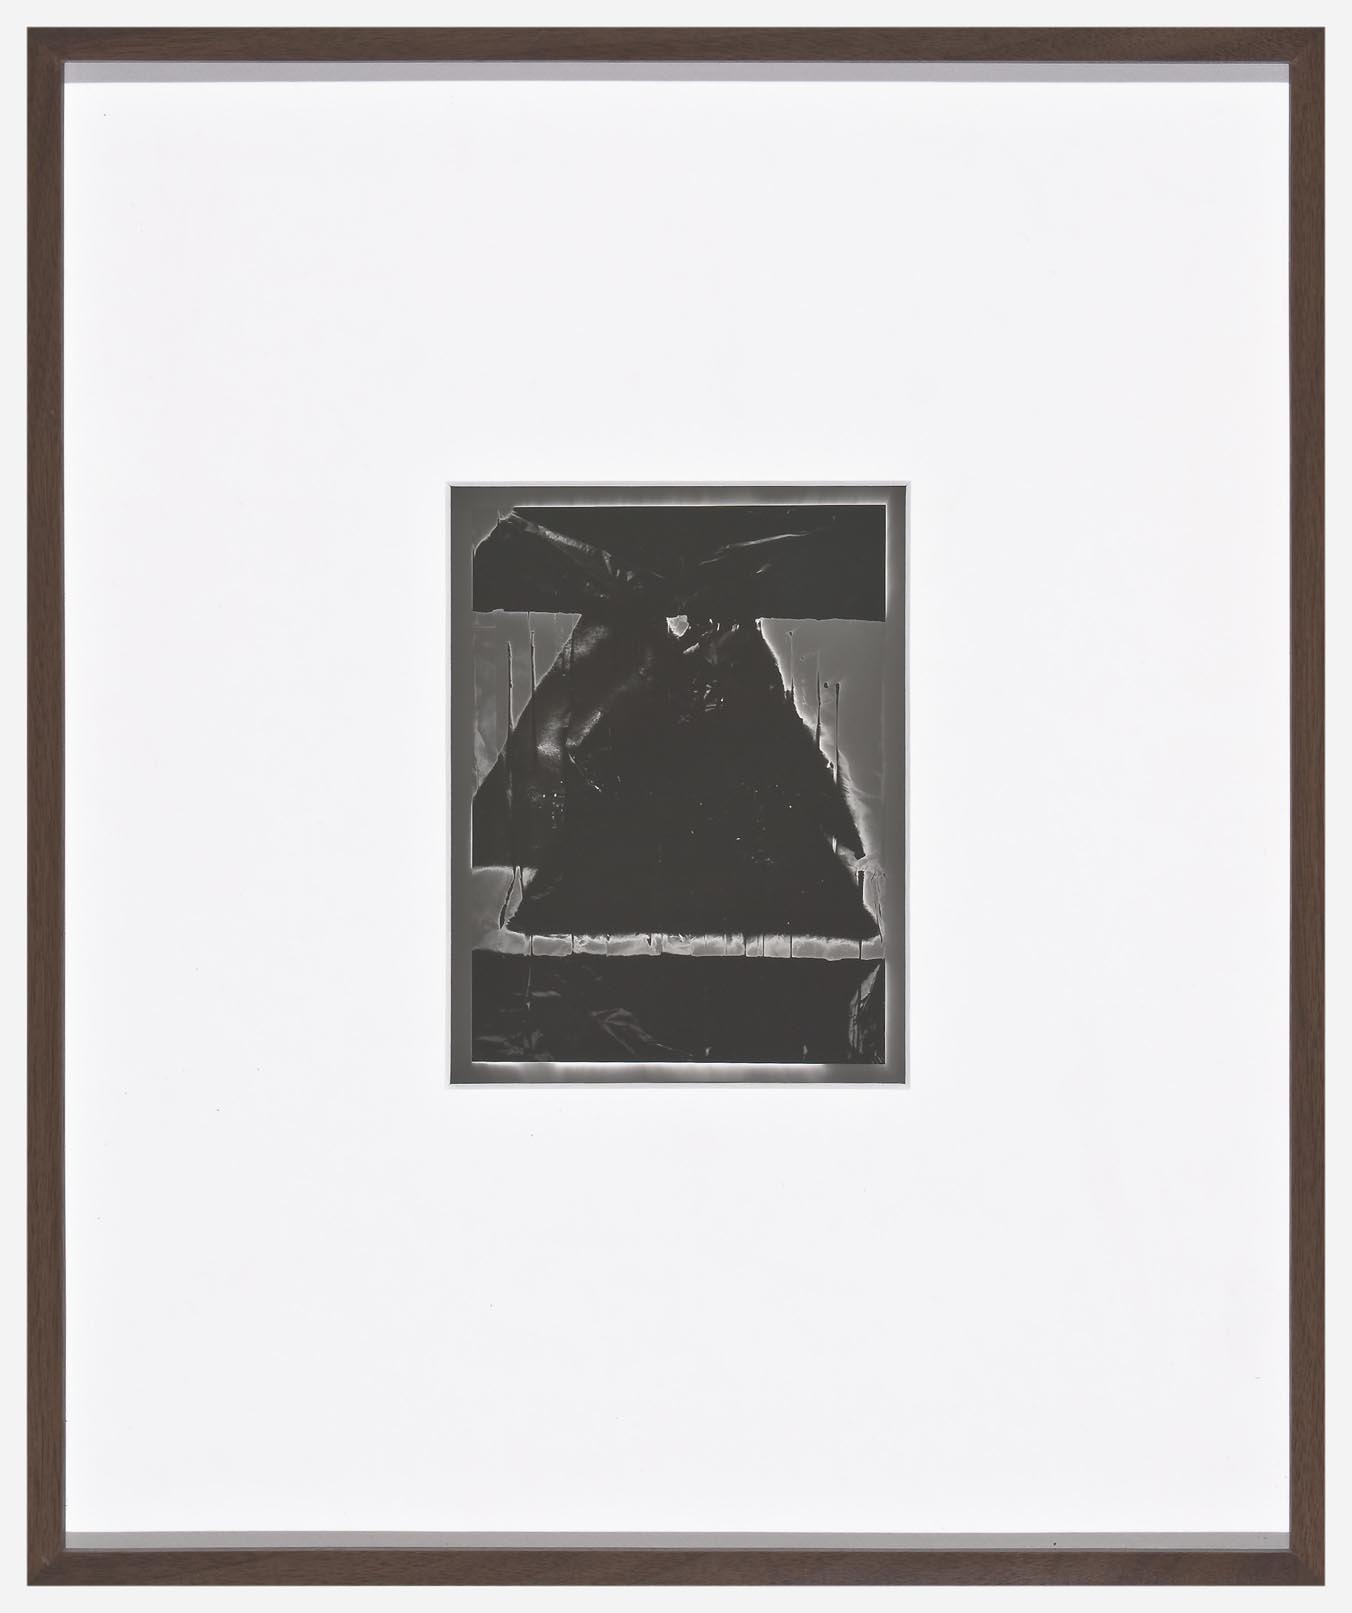     Anthony Pearson Untitled (Solarisation) 2007 unique framed silver gelatin photograph 43.2 x 35.6 cm    